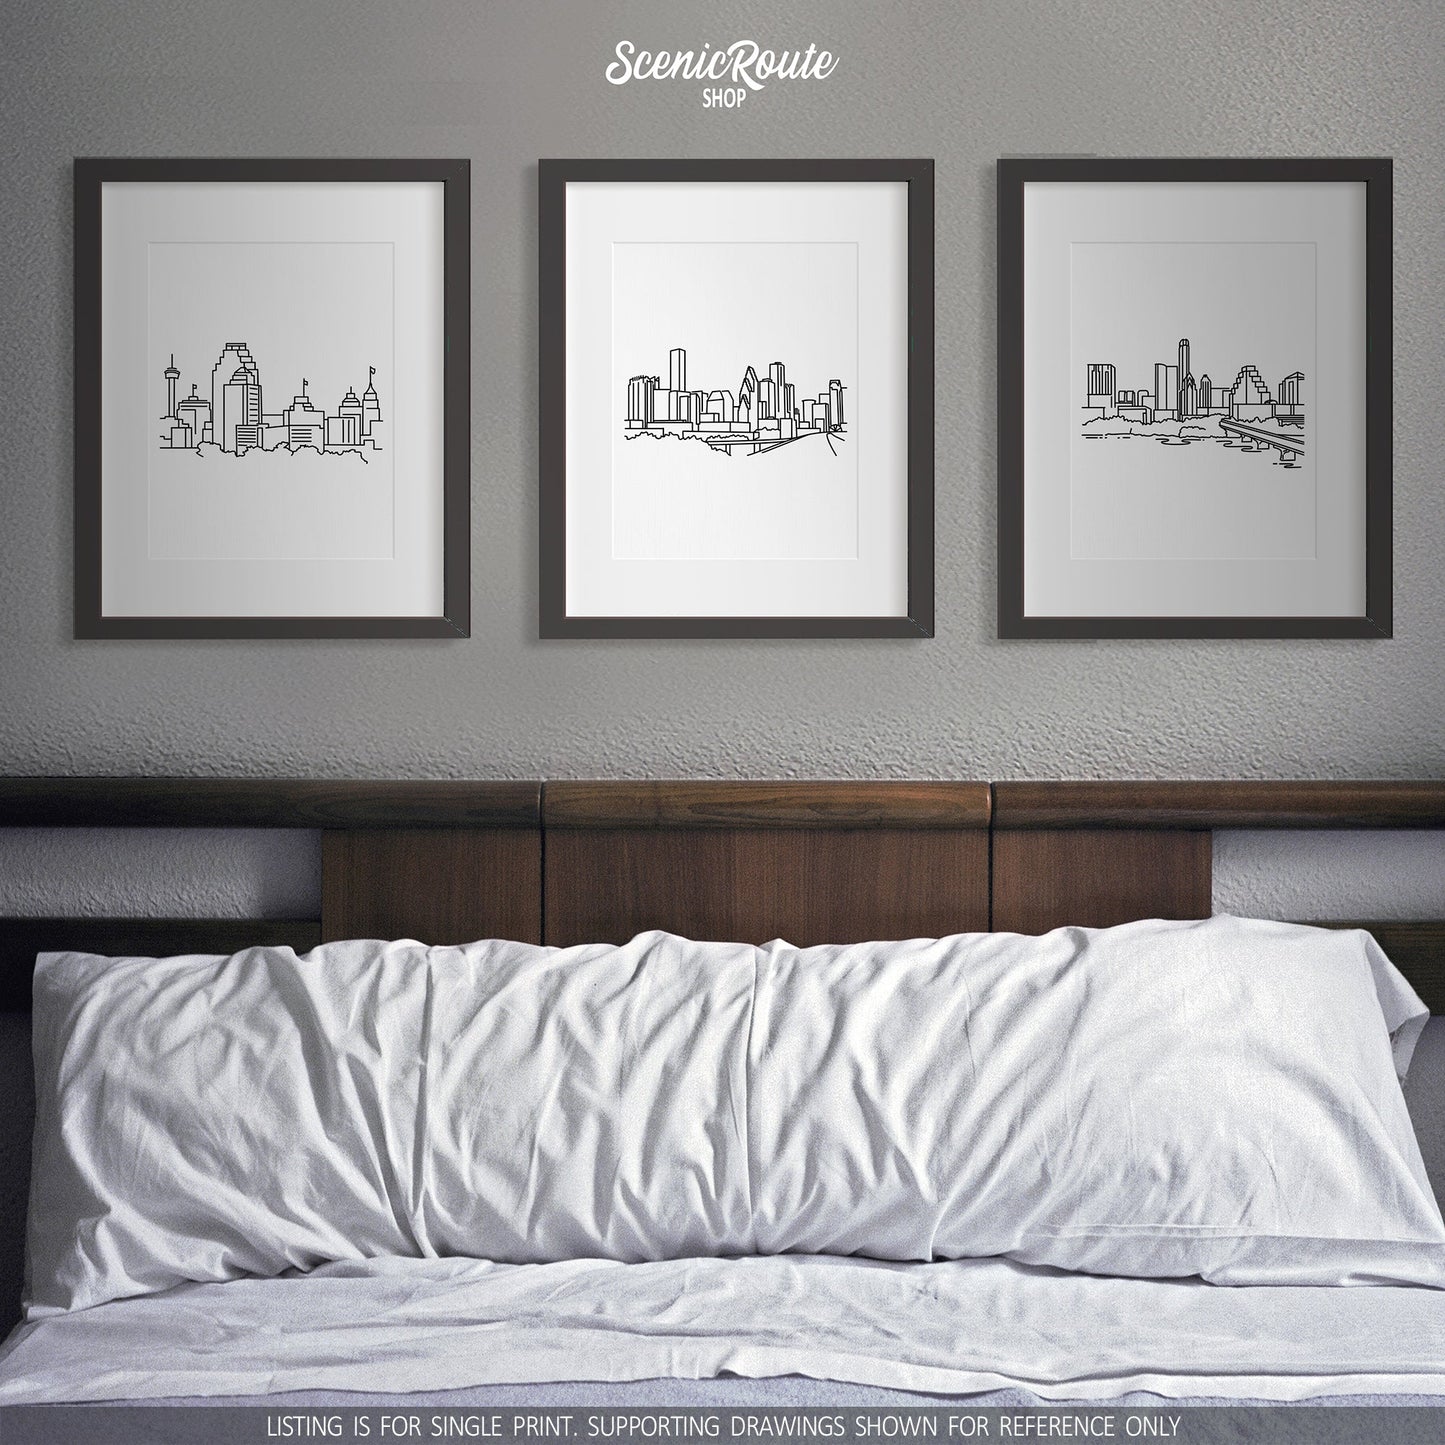 A group of three framed drawings on a white wall above a bed. The line art drawings include the San Antonio Skyline, Houston Skyline, and Austin Skyline